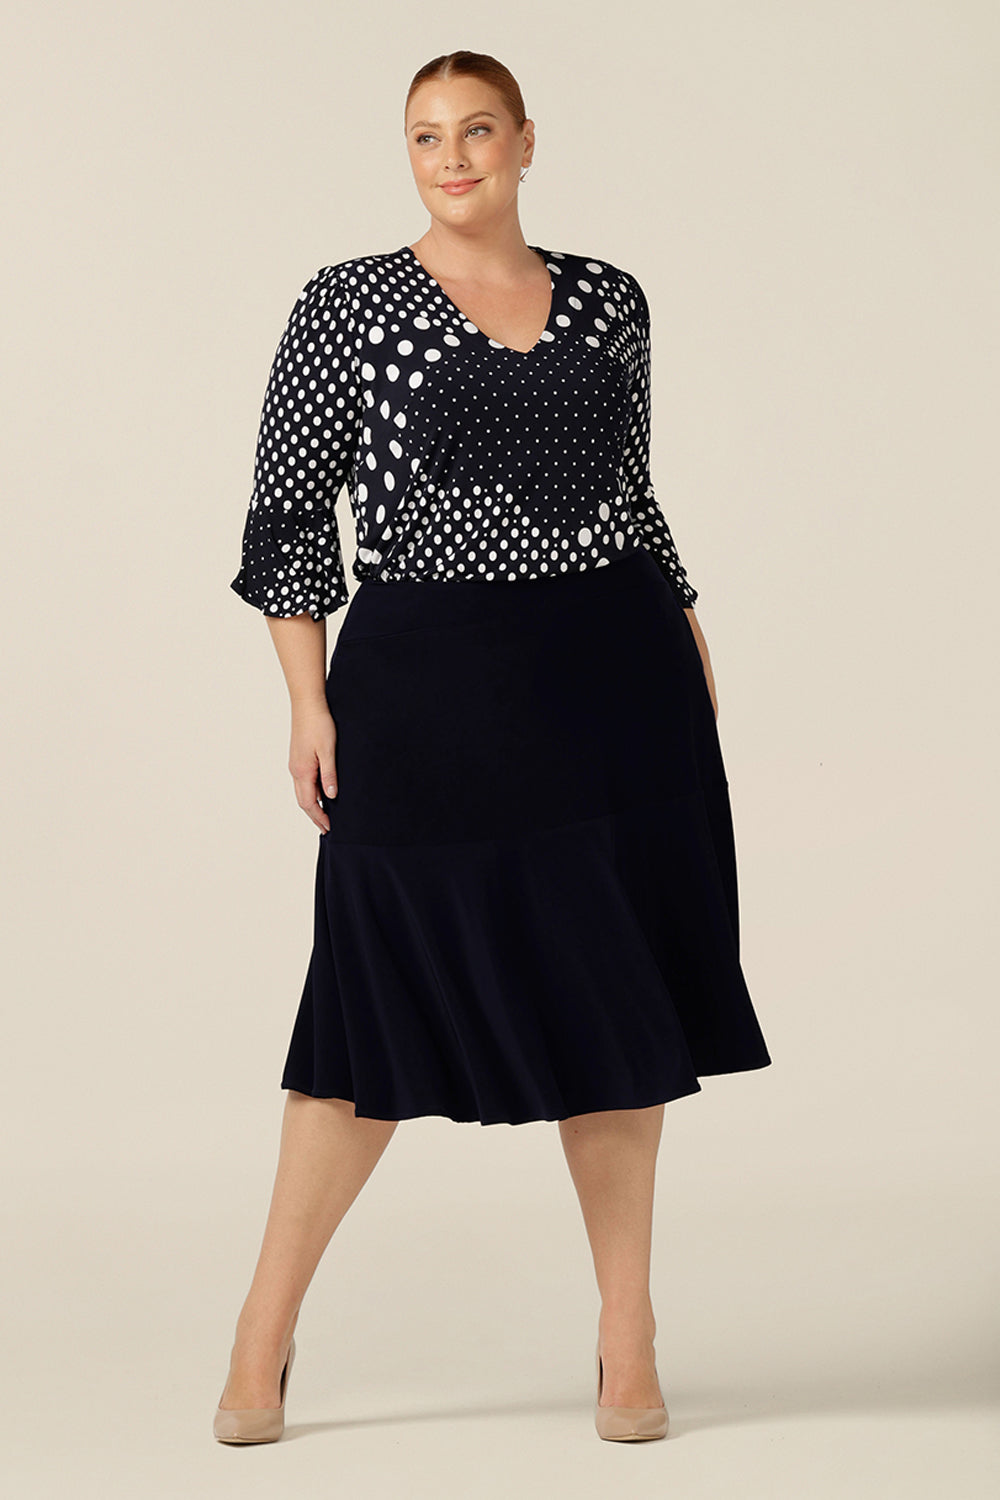 A chic top for plus size and fuller figure women, this V-neck top with fluted 3/4 sleeves comes in a navy and white polka dot print. Worn with a knee-length navy skirt, this top is good for work and corporate wear.